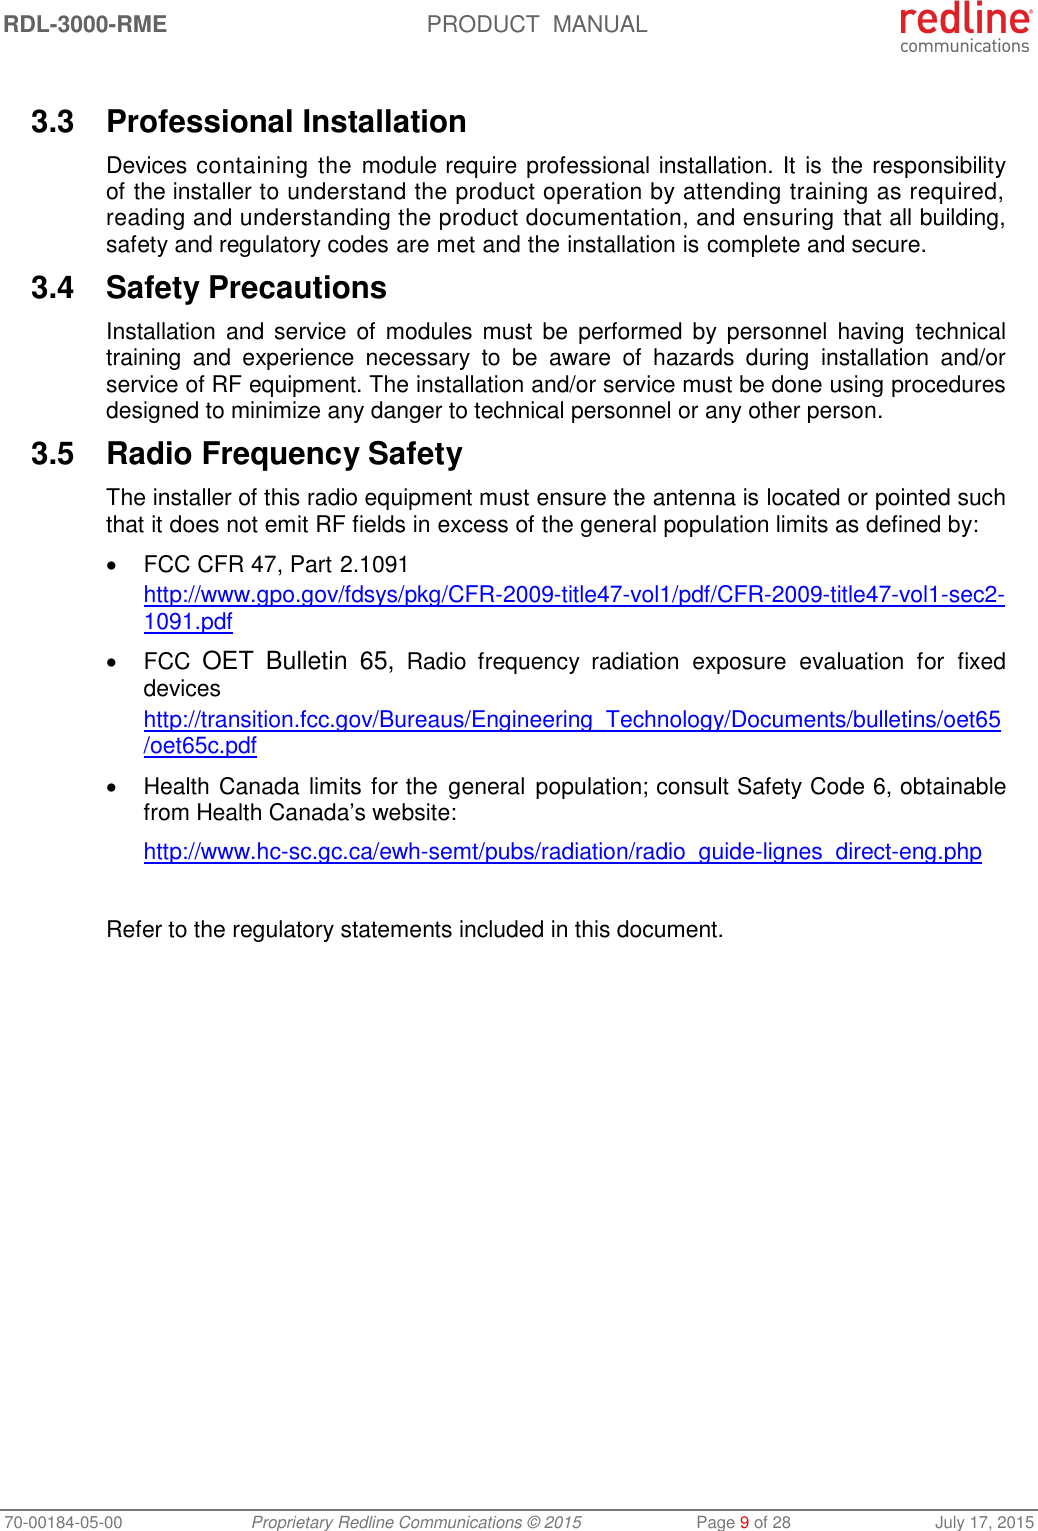 RDL-3000-RME  PRODUCT  MANUAL 70-00184-05-00 Proprietary Redline Communications © 2015  Page 9 of 28  July 17, 2015  3.3  Professional Installation Devices containing the  module require professional installation. It  is the responsibility of the installer to understand the product operation by attending training as required, reading and understanding the product documentation, and ensuring that all building, safety and regulatory codes are met and the installation is complete and secure. 3.4  Safety Precautions  Installation  and  service of  modules  must  be  performed  by  personnel  having  technical training  and  experience  necessary  to  be  aware  of  hazards  during  installation  and/or service of RF equipment. The installation and/or service must be done using procedures designed to minimize any danger to technical personnel or any other person.  3.5  Radio Frequency Safety The installer of this radio equipment must ensure the antenna is located or pointed such that it does not emit RF fields in excess of the general population limits as defined by:   FCC CFR 47, Part 2.1091 http://www.gpo.gov/fdsys/pkg/CFR-2009-title47-vol1/pdf/CFR-2009-title47-vol1-sec2-1091.pdf   FCC OET  Bulletin  65,  Radio  frequency  radiation  exposure  evaluation  for  fixed devices http://transition.fcc.gov/Bureaus/Engineering_Technology/Documents/bulletins/oet65/oet65c.pdf   Health Canada limits for the  general  population; consult Safety Code 6, obtainable from Health Canada’s website: http://www.hc-sc.gc.ca/ewh-semt/pubs/radiation/radio_guide-lignes_direct-eng.php  Refer to the regulatory statements included in this document. 